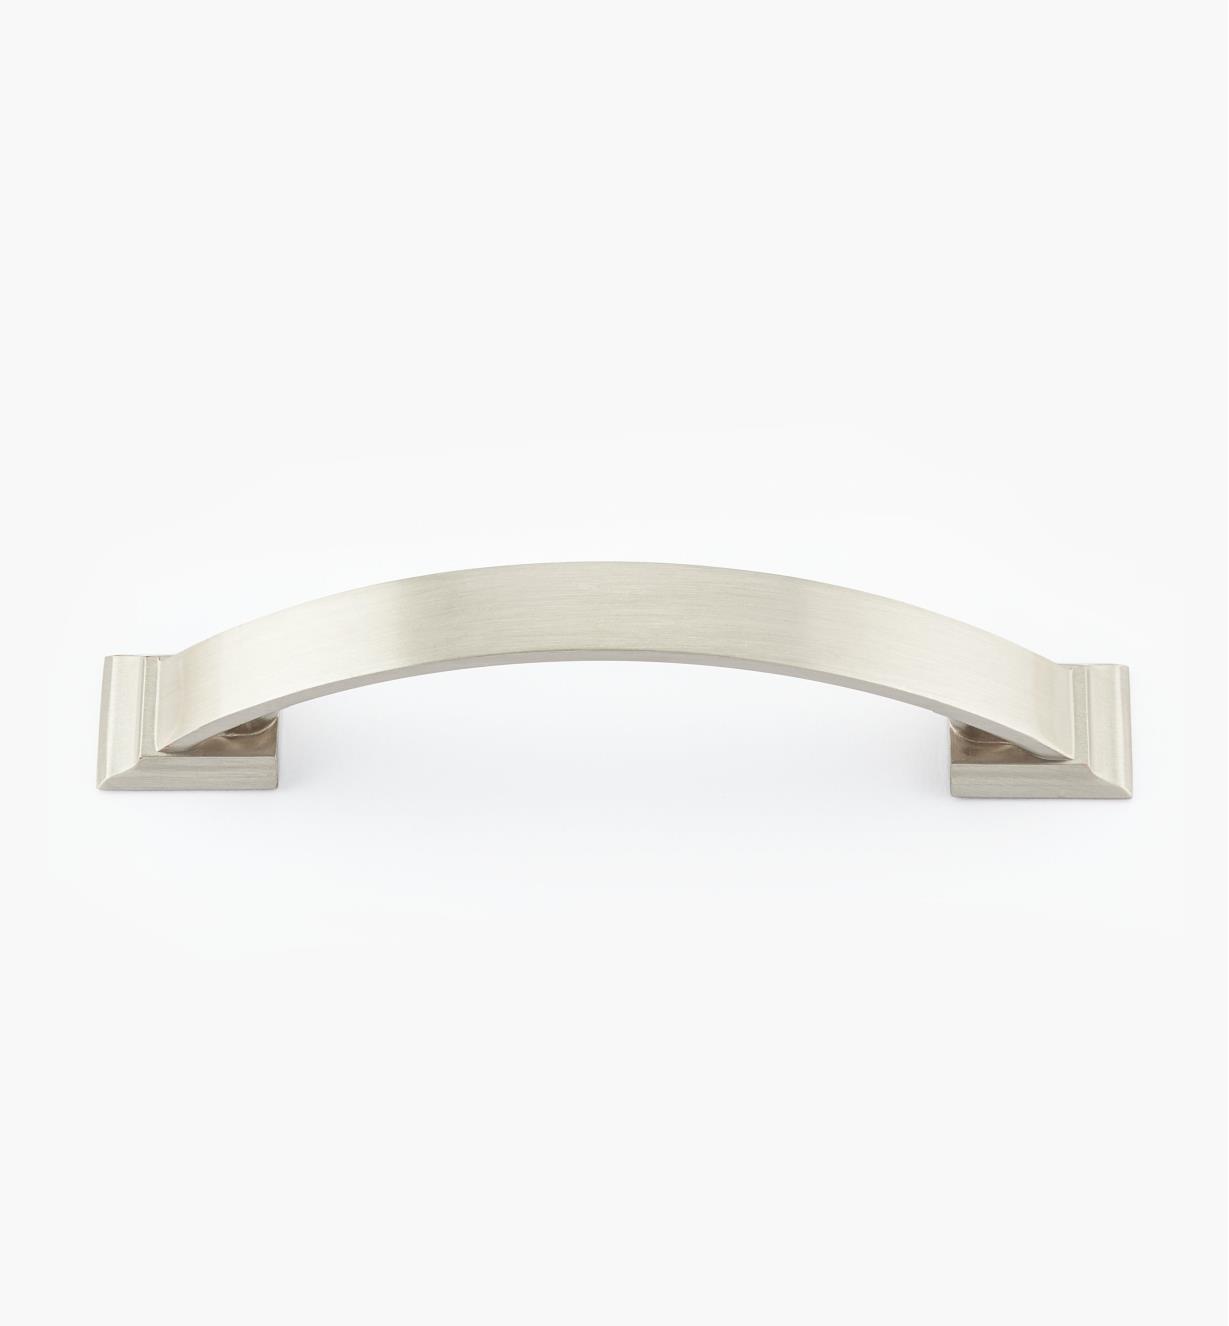 02A1952 - 96mm Satin Nickel Candler Handle